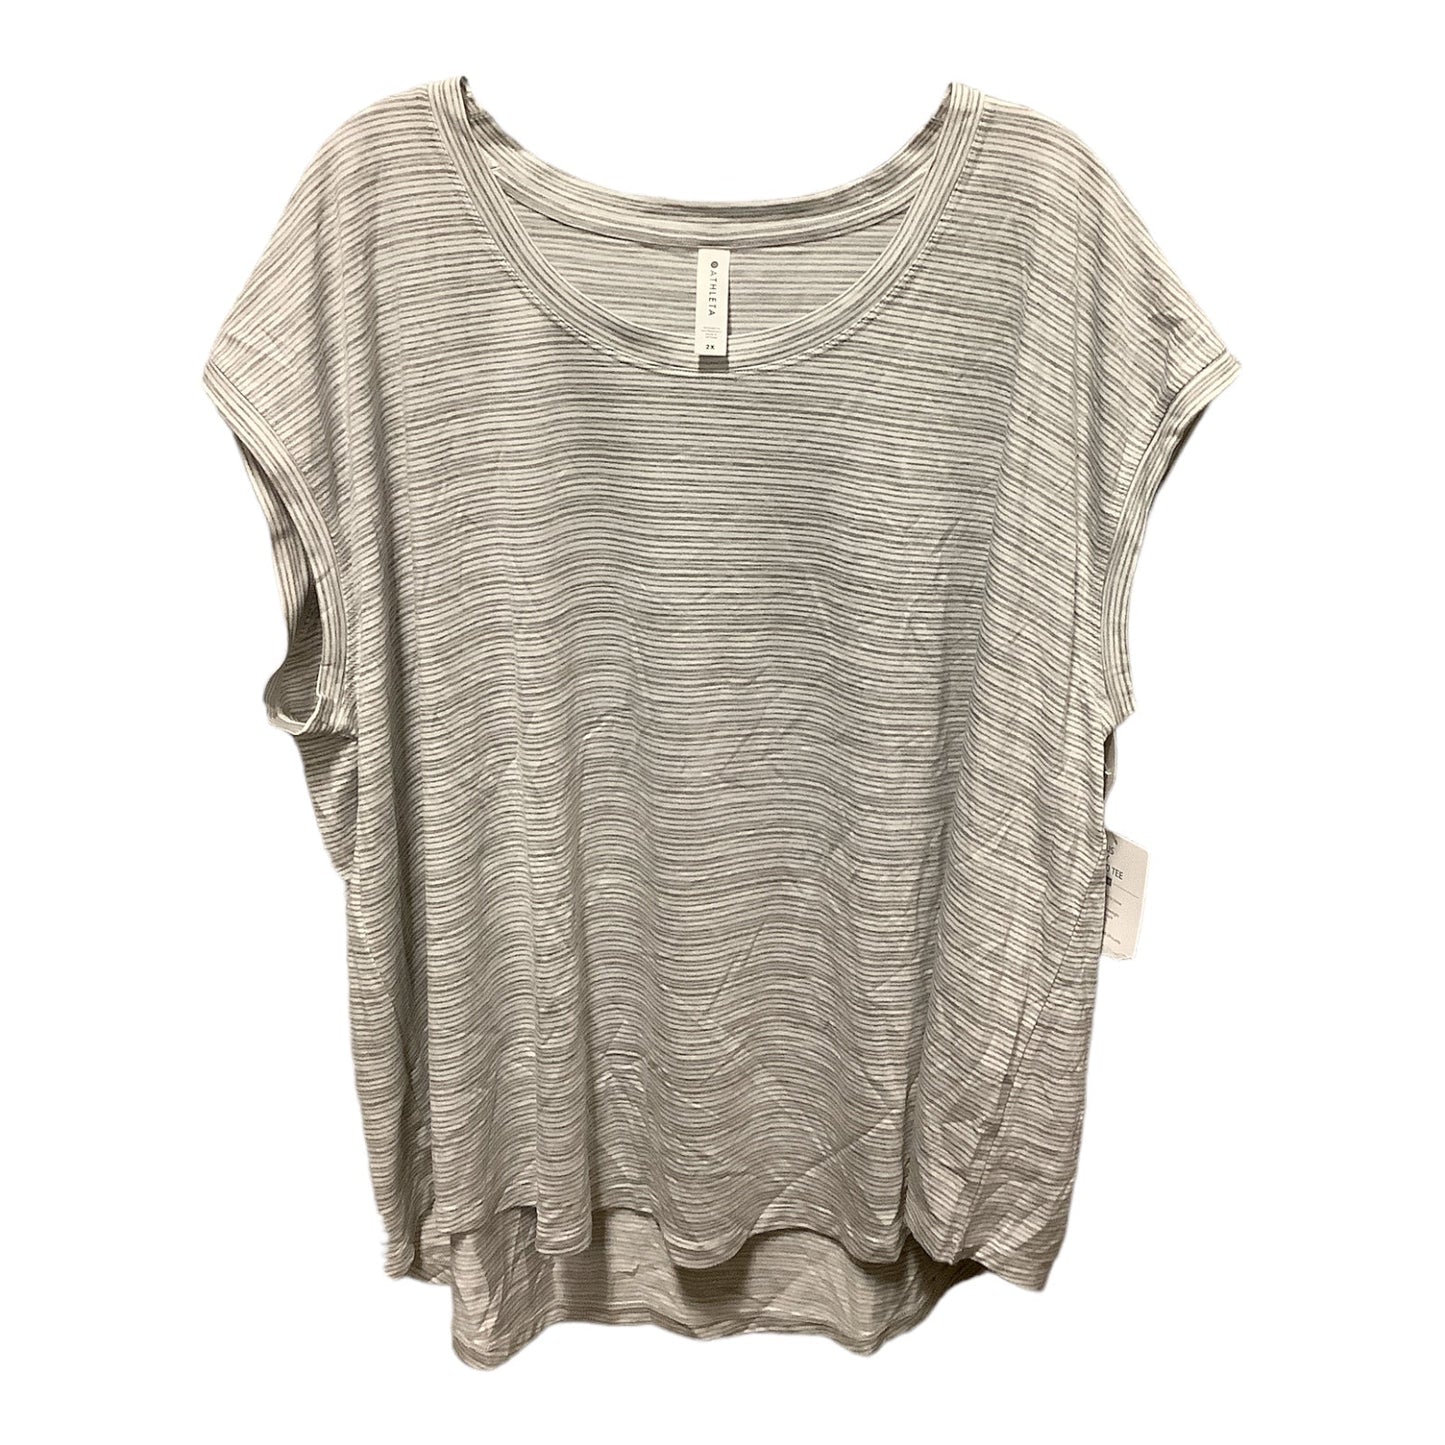 Athletic Top Short Sleeve By Athleta  Size: 24